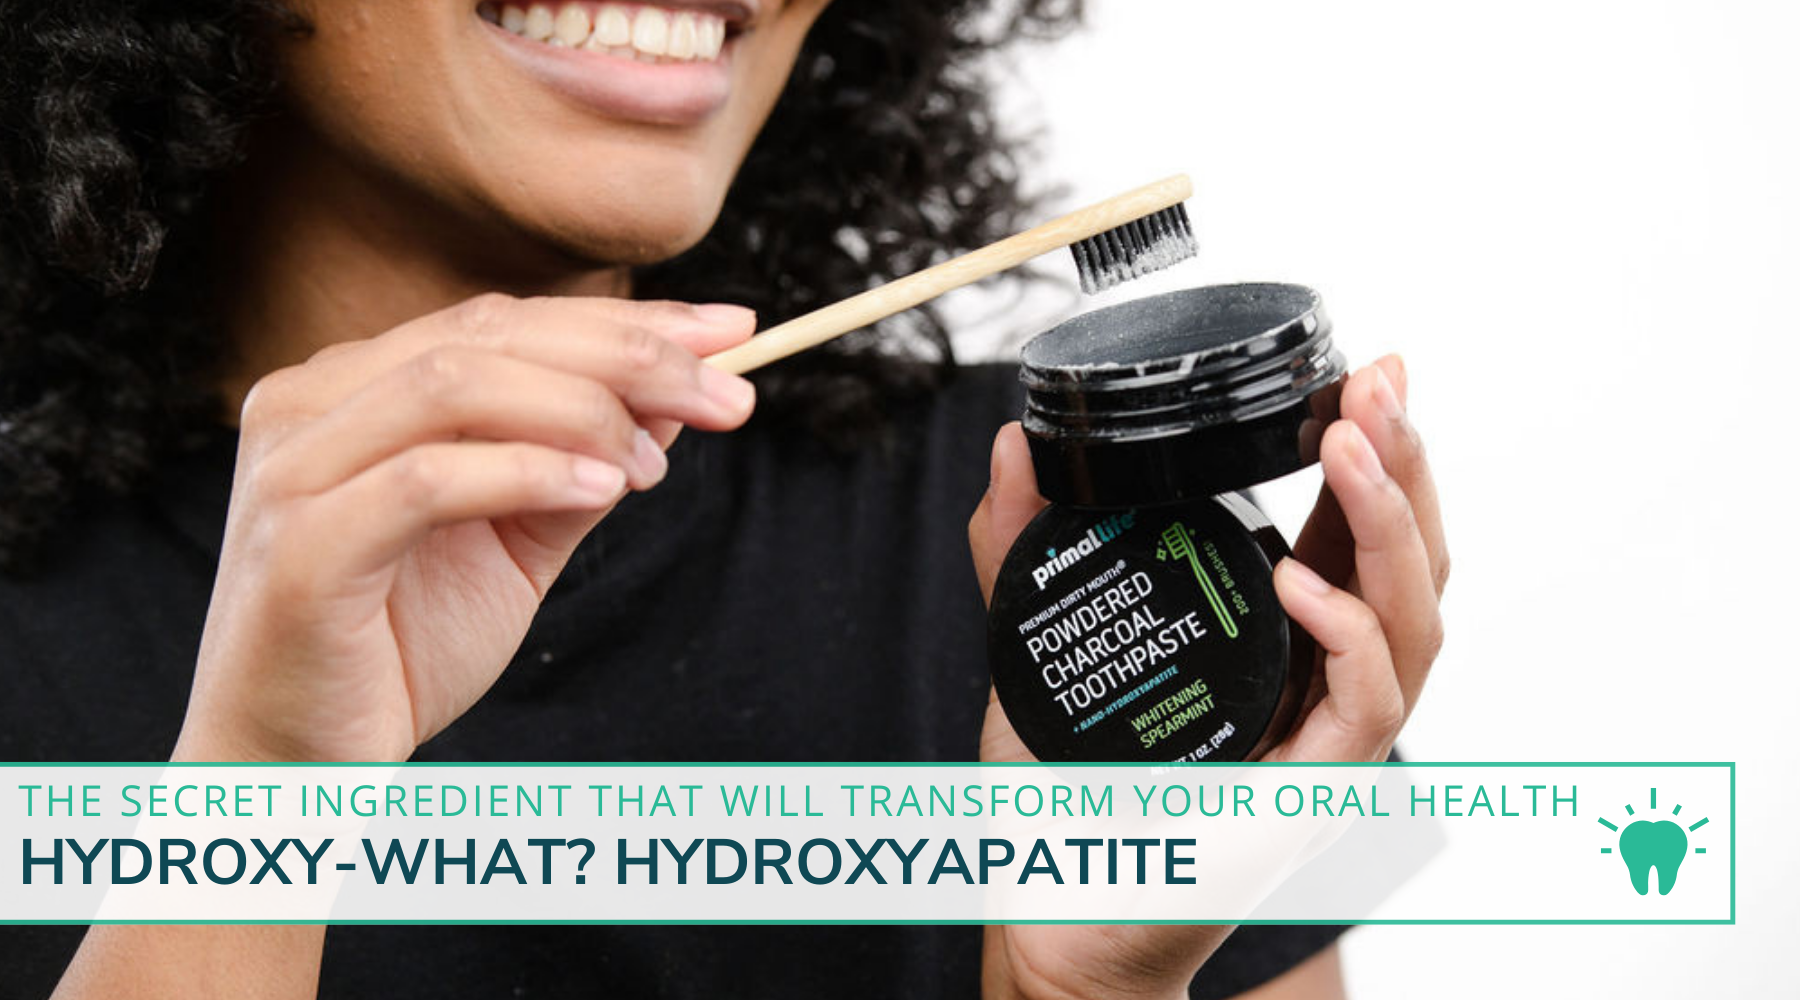 Hydroxy-what? Hydroxyapatite: The Secret Ingredient That Will Transform Your Oral Health